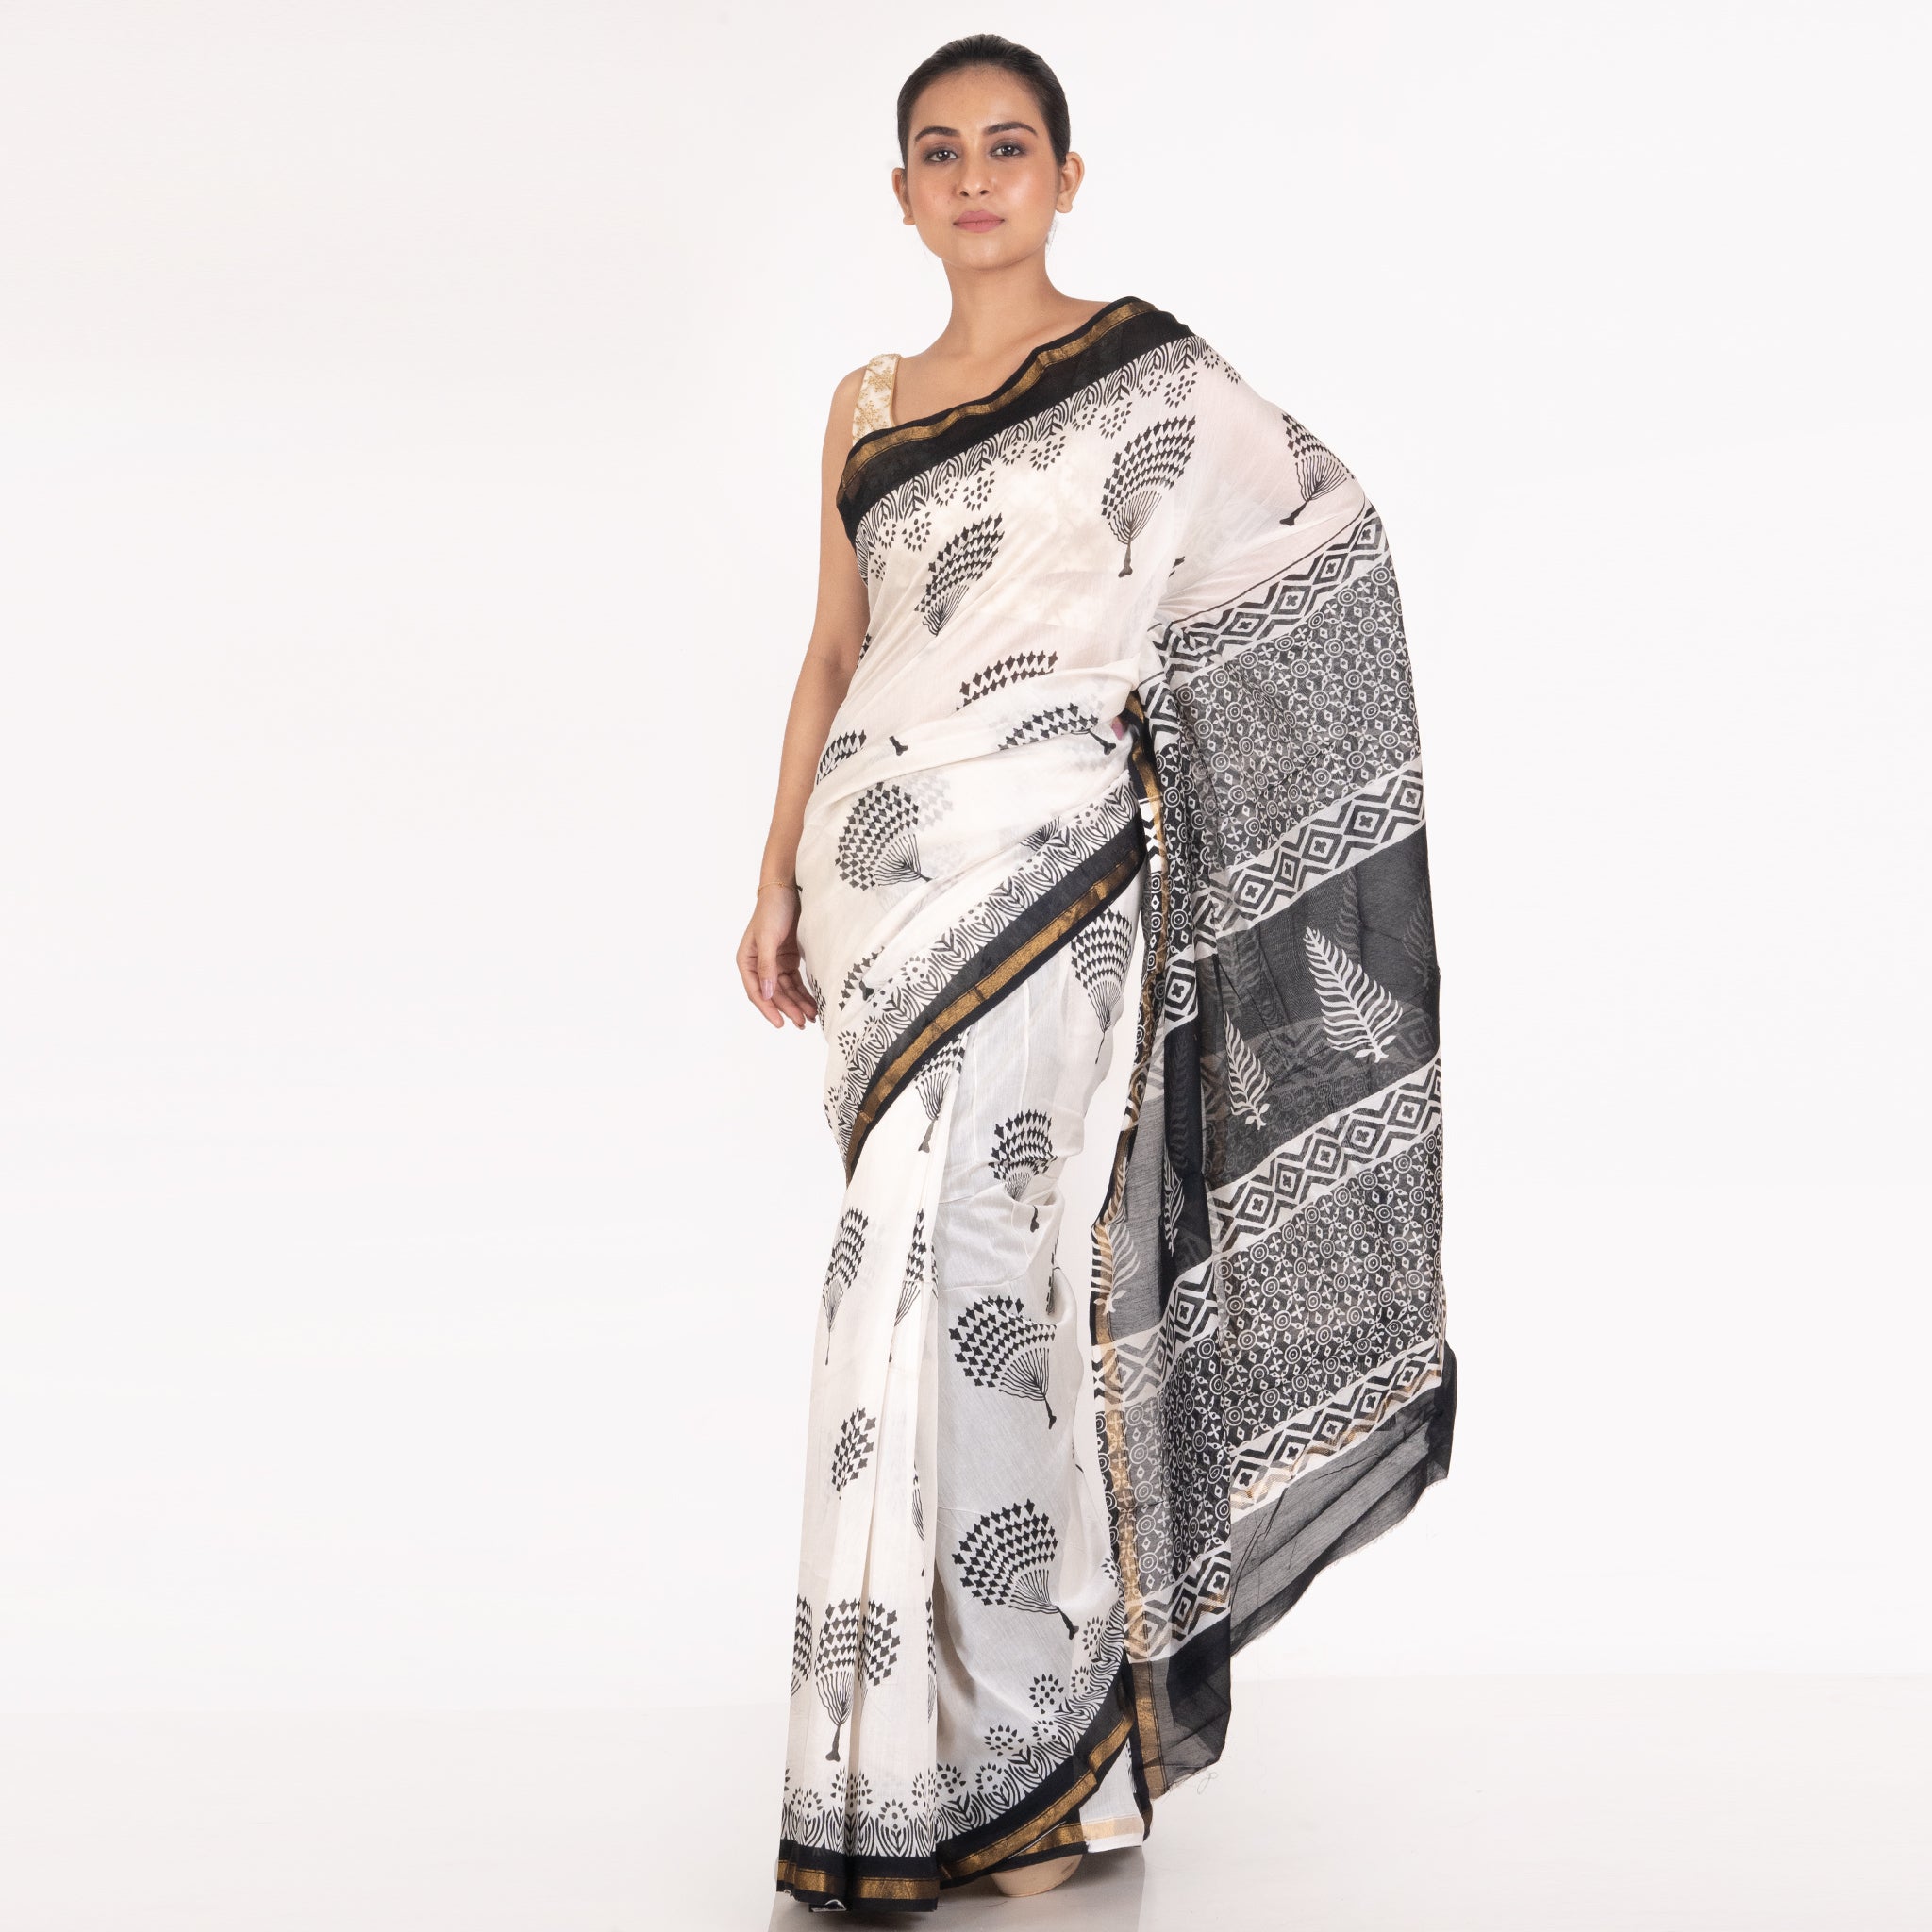 Women's Offwhite And Black Cotton Silk Chanderi Saree With Tree Motifs - Boveee